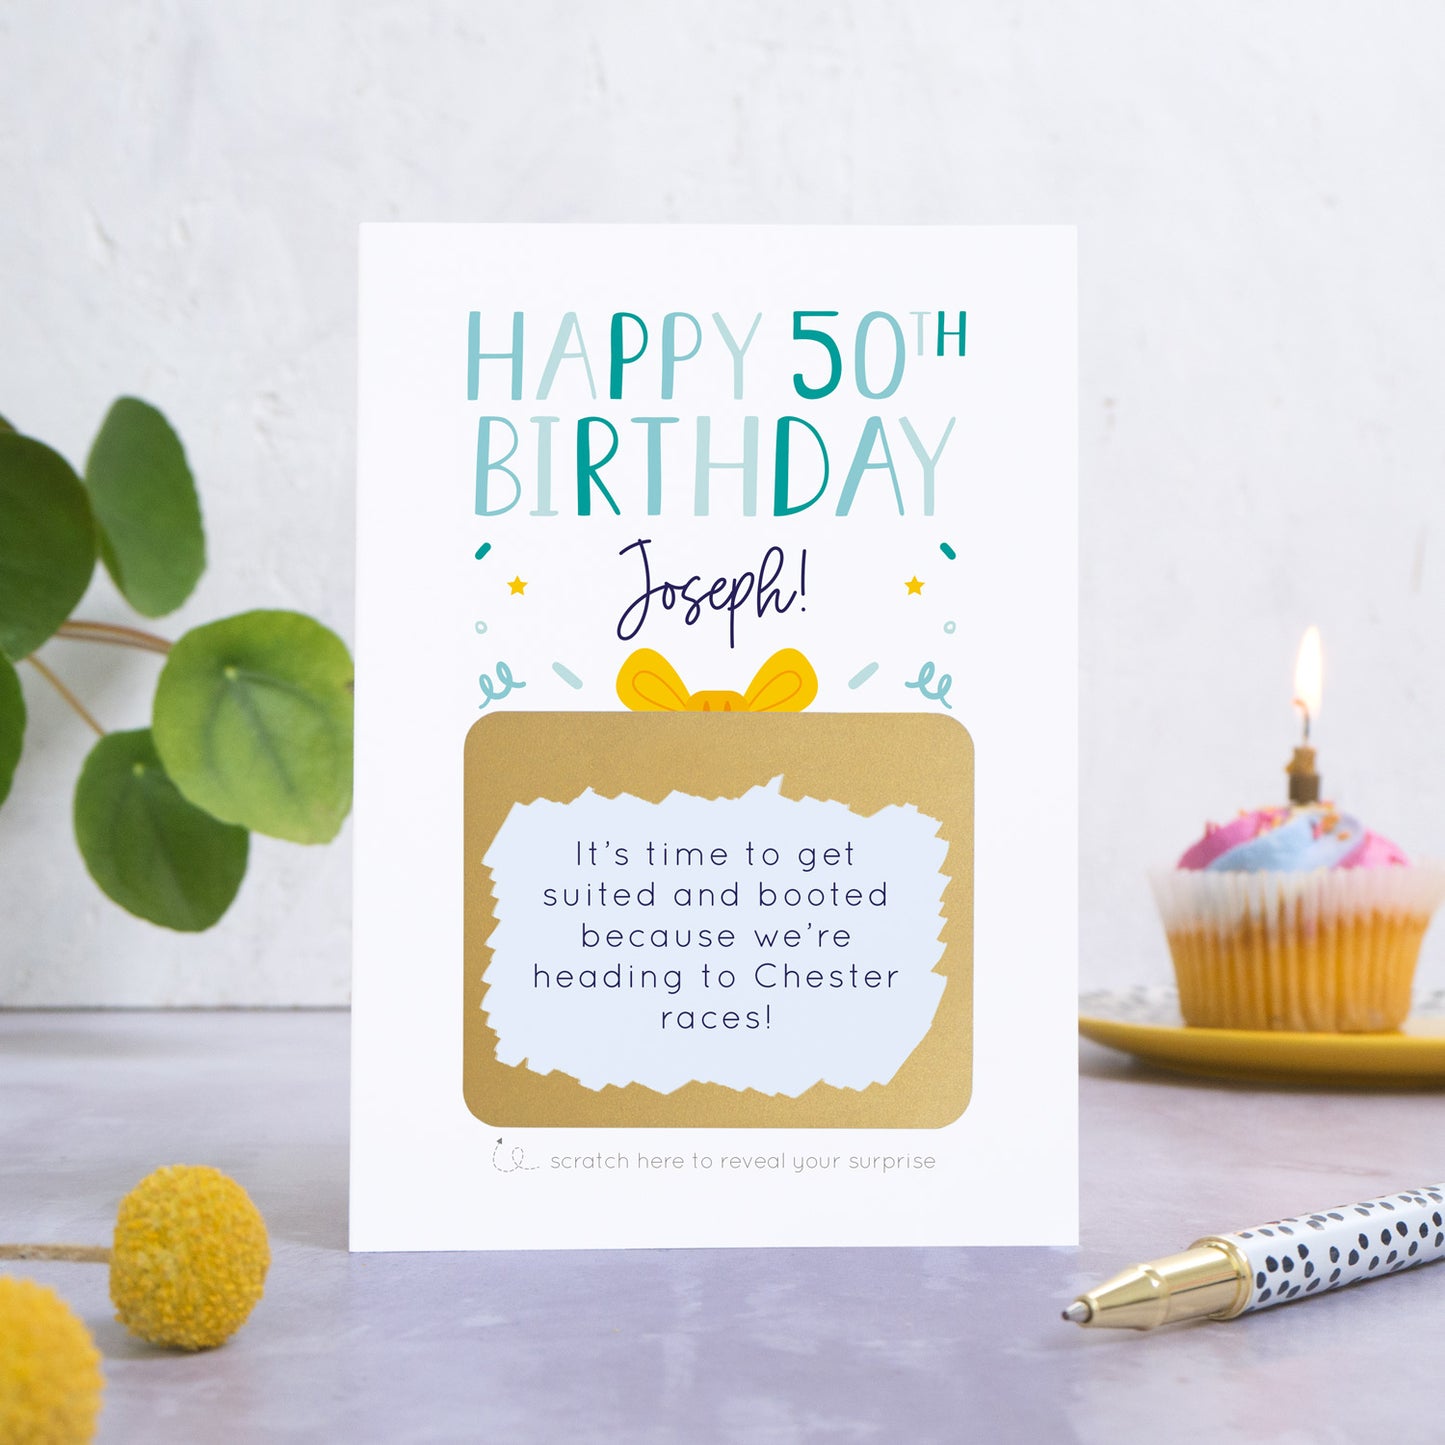 A personalised happy 50th birthday scratch card in blue that has been photographed on a white and grey background. There is foliage and yellow flowers on the left and a cupcake and a pen to the right. The card features the recipients name and a scratch panel that has been scratched off revealing a personalised message.